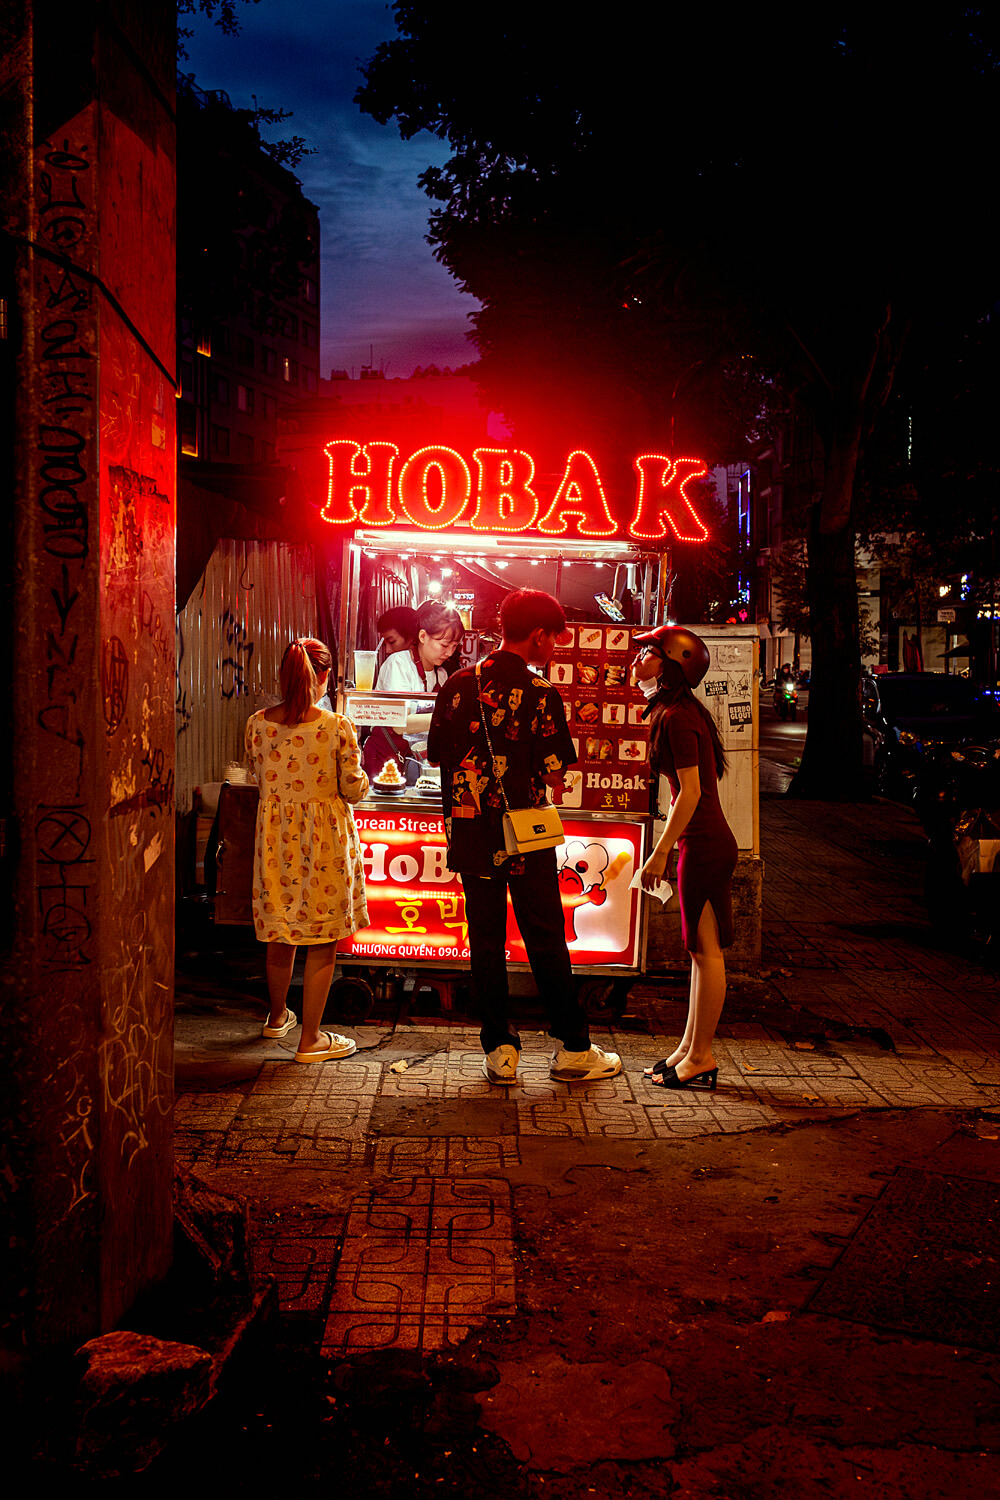 Customers gather around a brightly lit street food stall at night, the word 